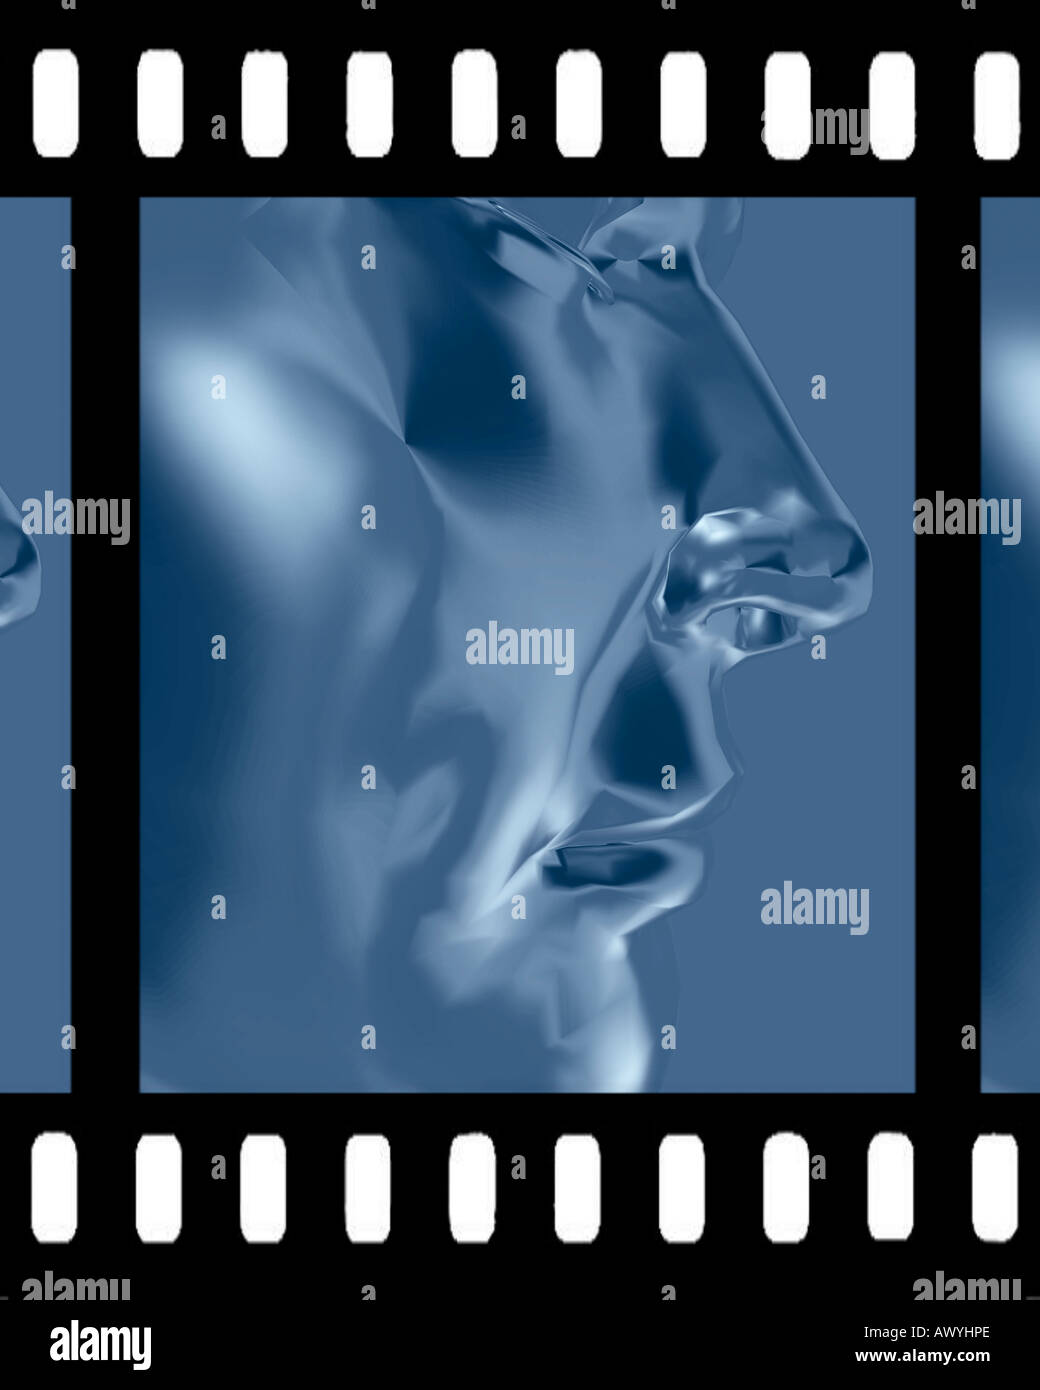 computer generated image of a man on 35mm film showing sprocket holes Stock Photo